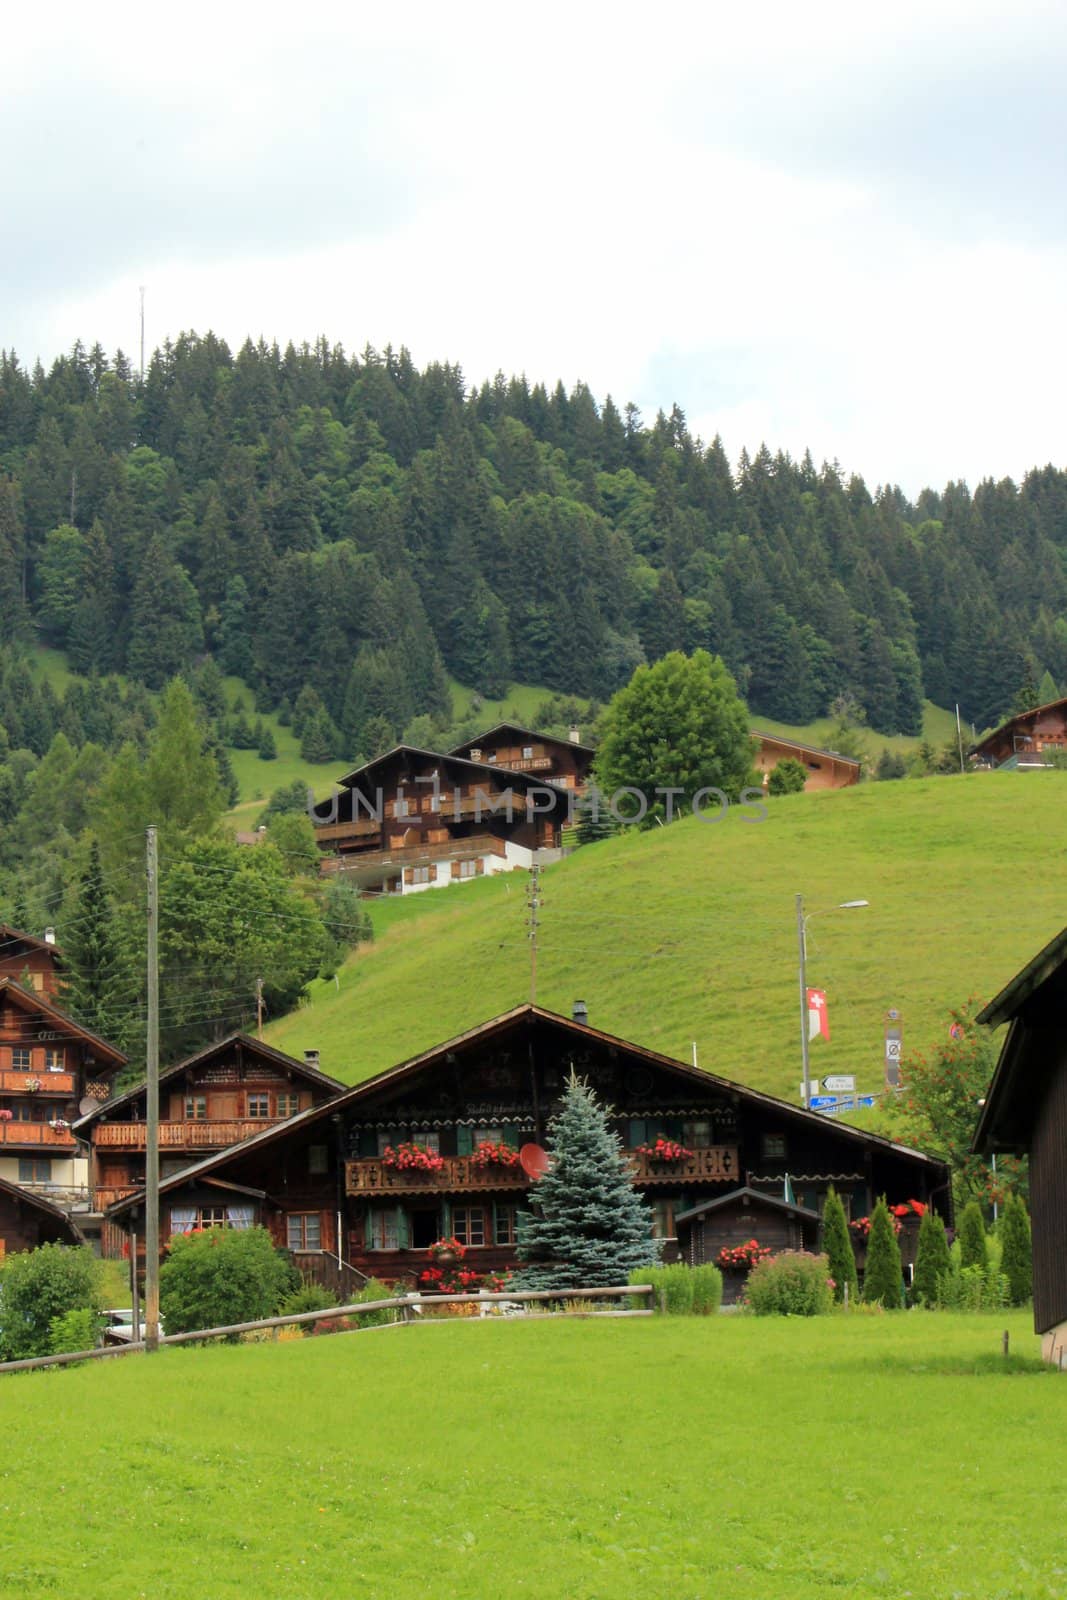 Chalets made of brown wood and decorated with flowers by summer at Diablerets village, Switzerland